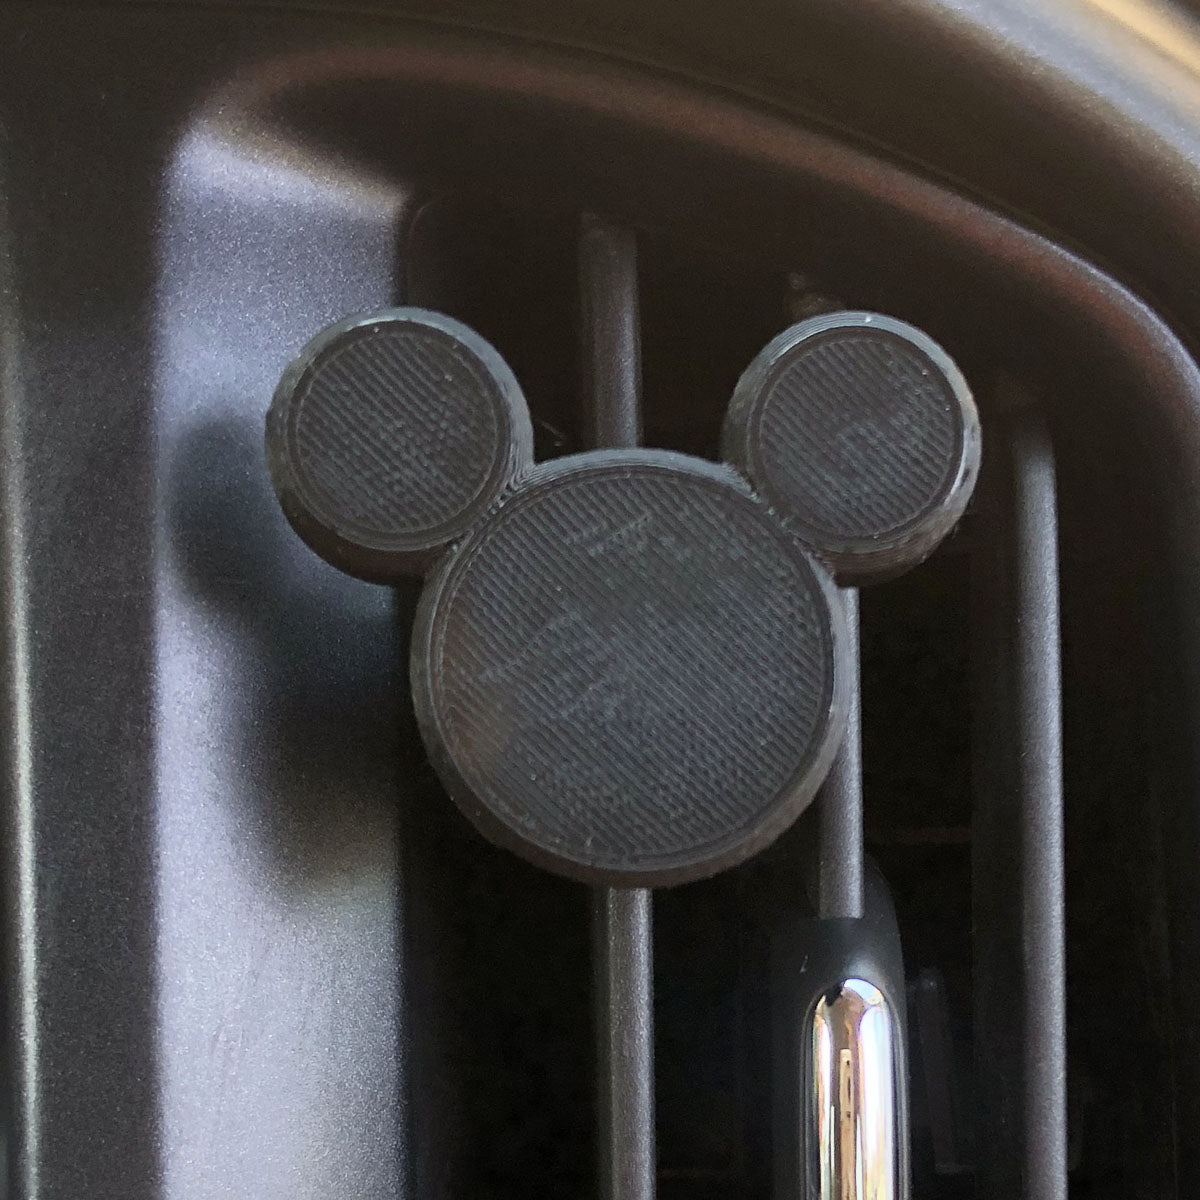 Mouse Head Car Character Clip - Vent Decor / Holder